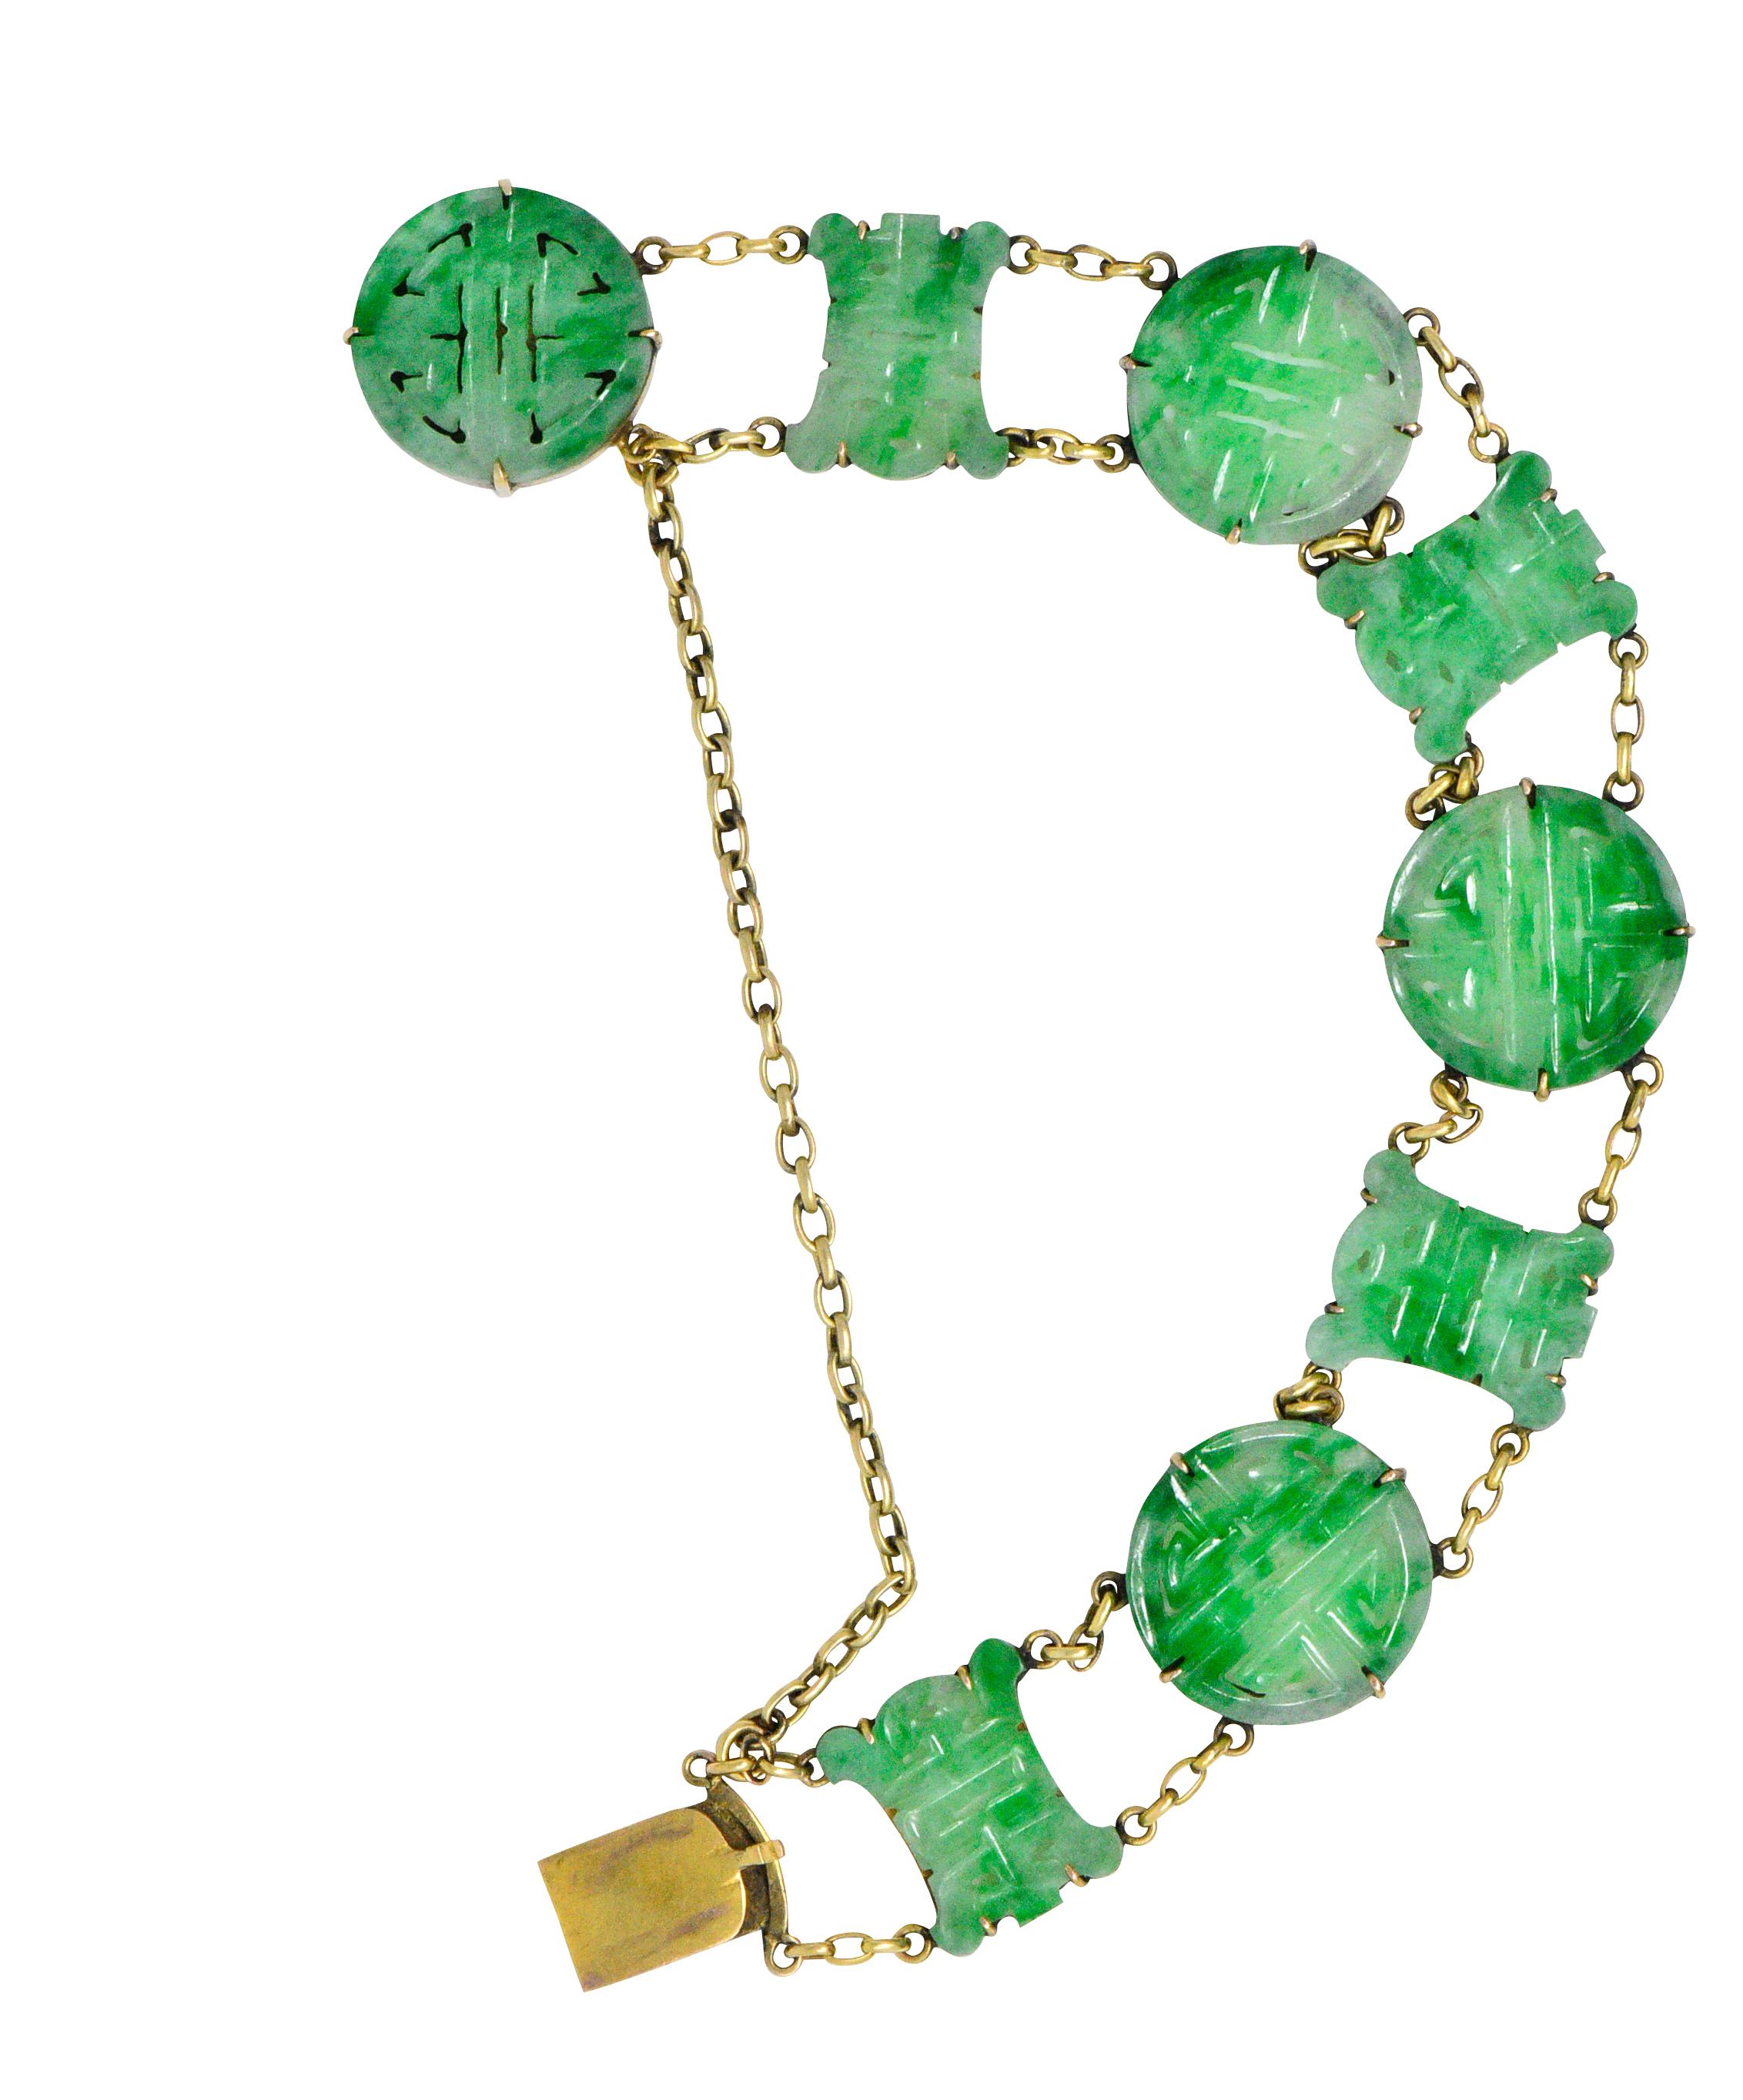 Featuring 8 carved jade links, 4 depicting the round symbol for shou, meaning longevity and 4 portraying the symbol for happiness

Bright mottled green, well matched 

Connected by cable style chains tested as 14k gold

Concealed clasp with safety